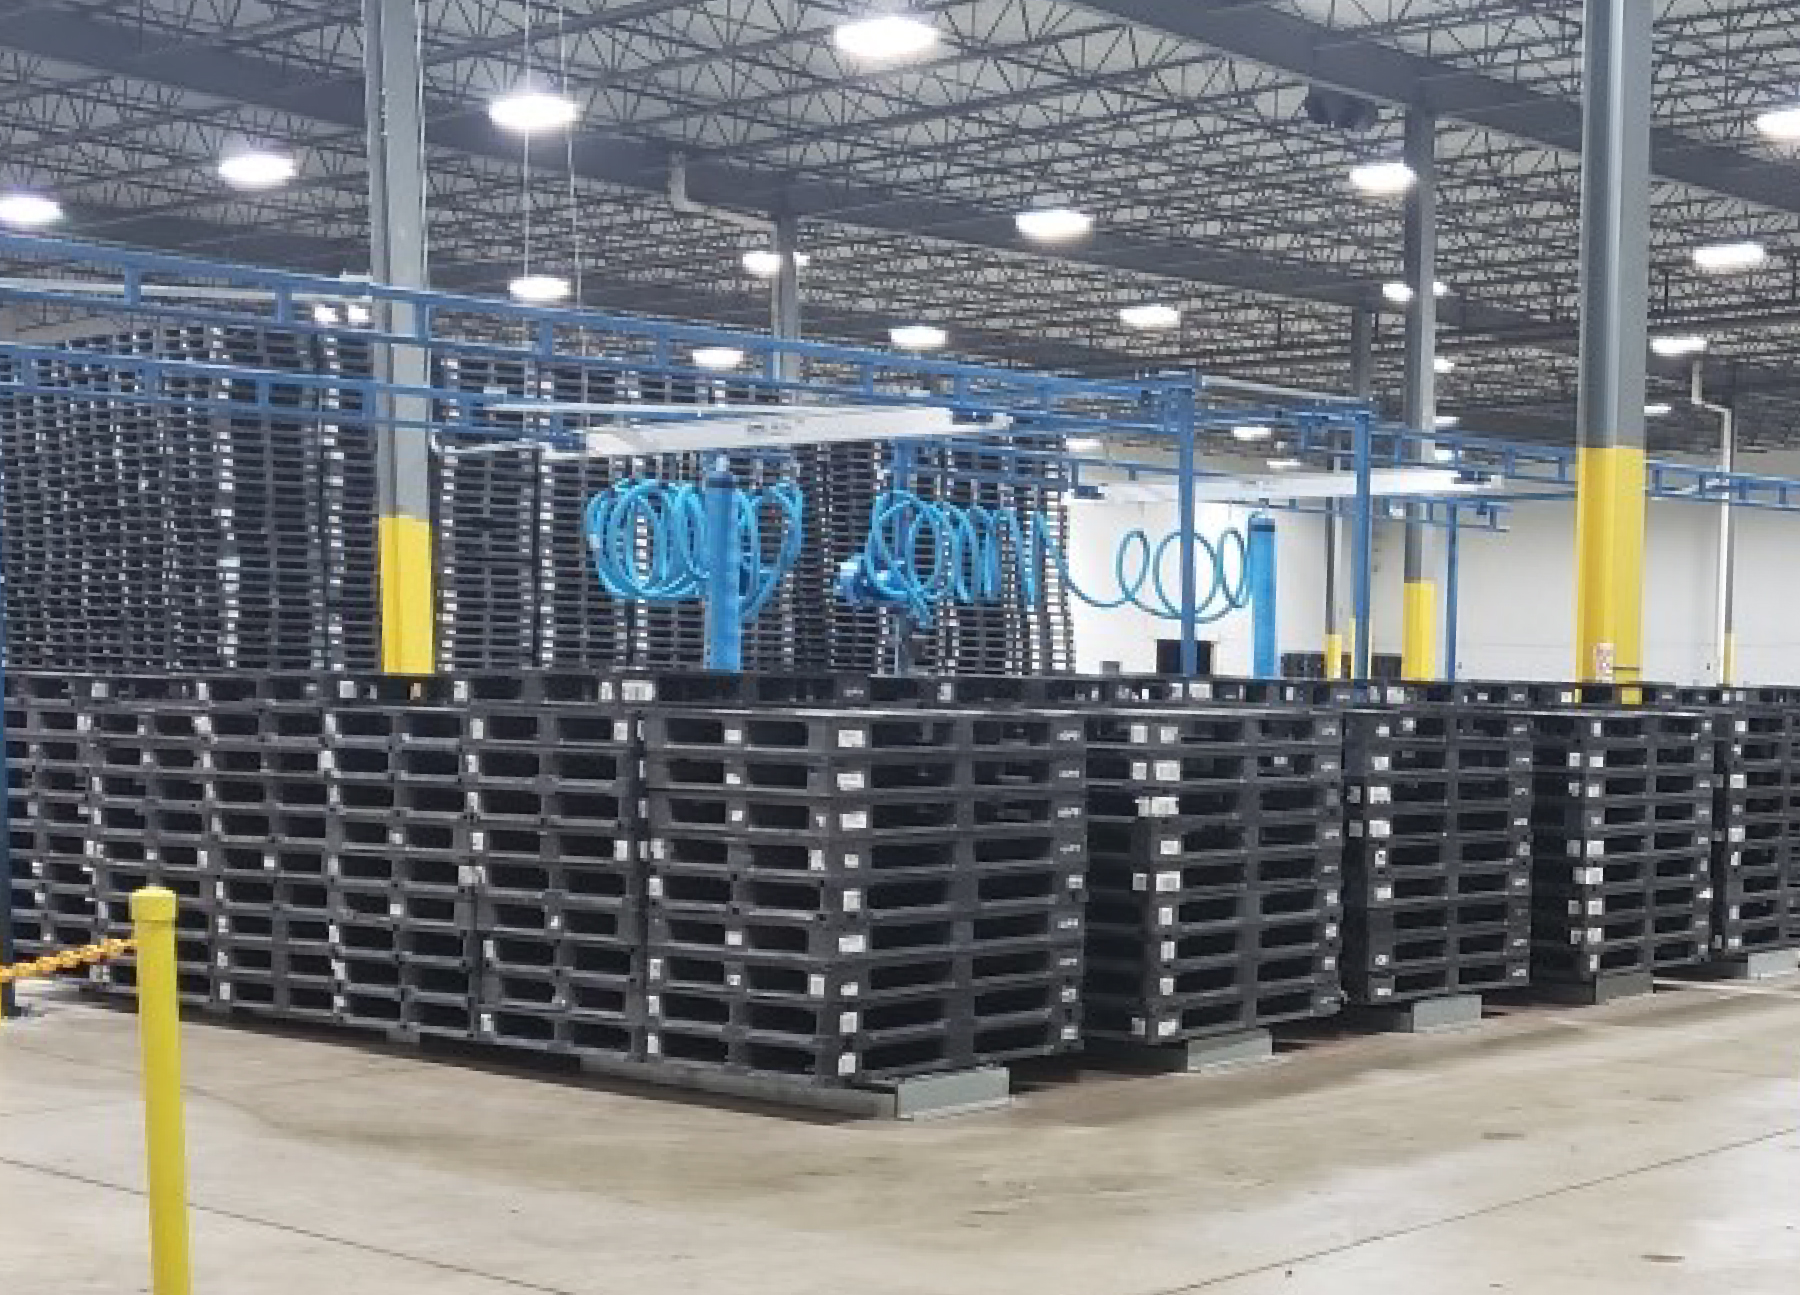 iGPS Blog post Tips and Tricks for Managing Pallet Inventory - Stacks of iGPS pallets in warehouse